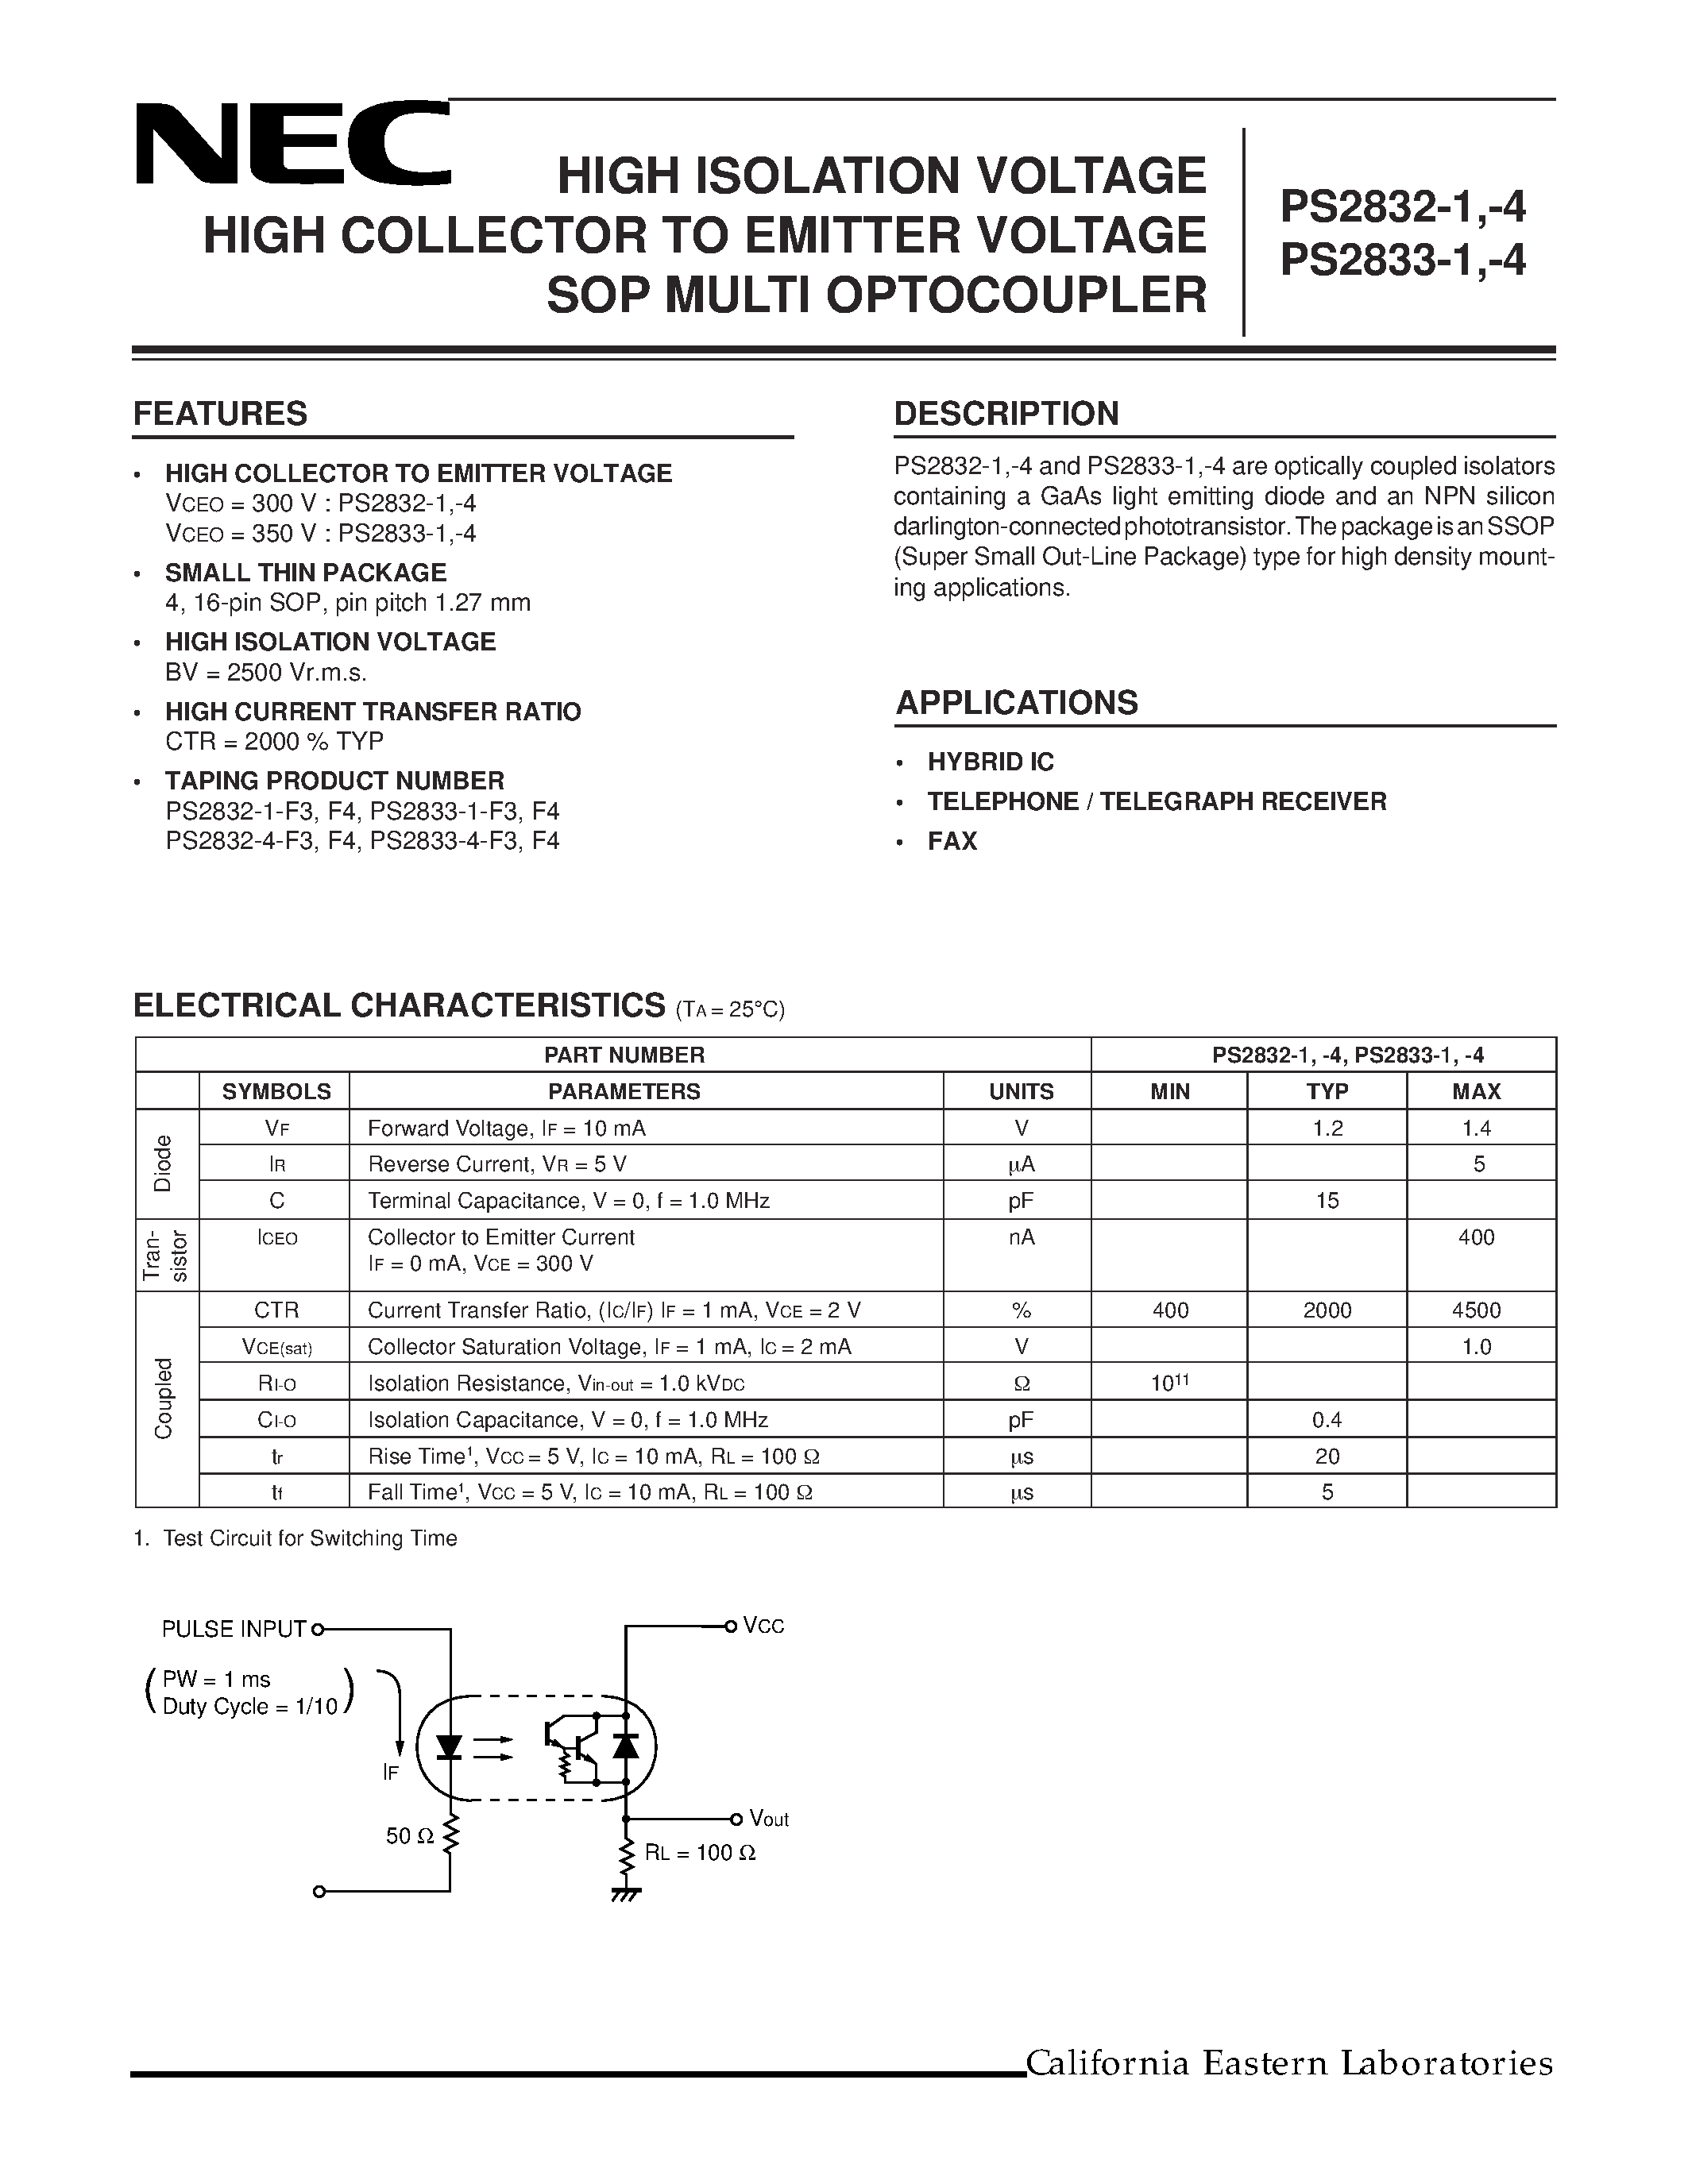 Даташит PS2832-1-V-F3 - HIGH ISOLATION VOLTAGE HIGH COLLECTOR TO EMITTER VOLTAGE SOP MULTI OPTOCOUPLER страница 1